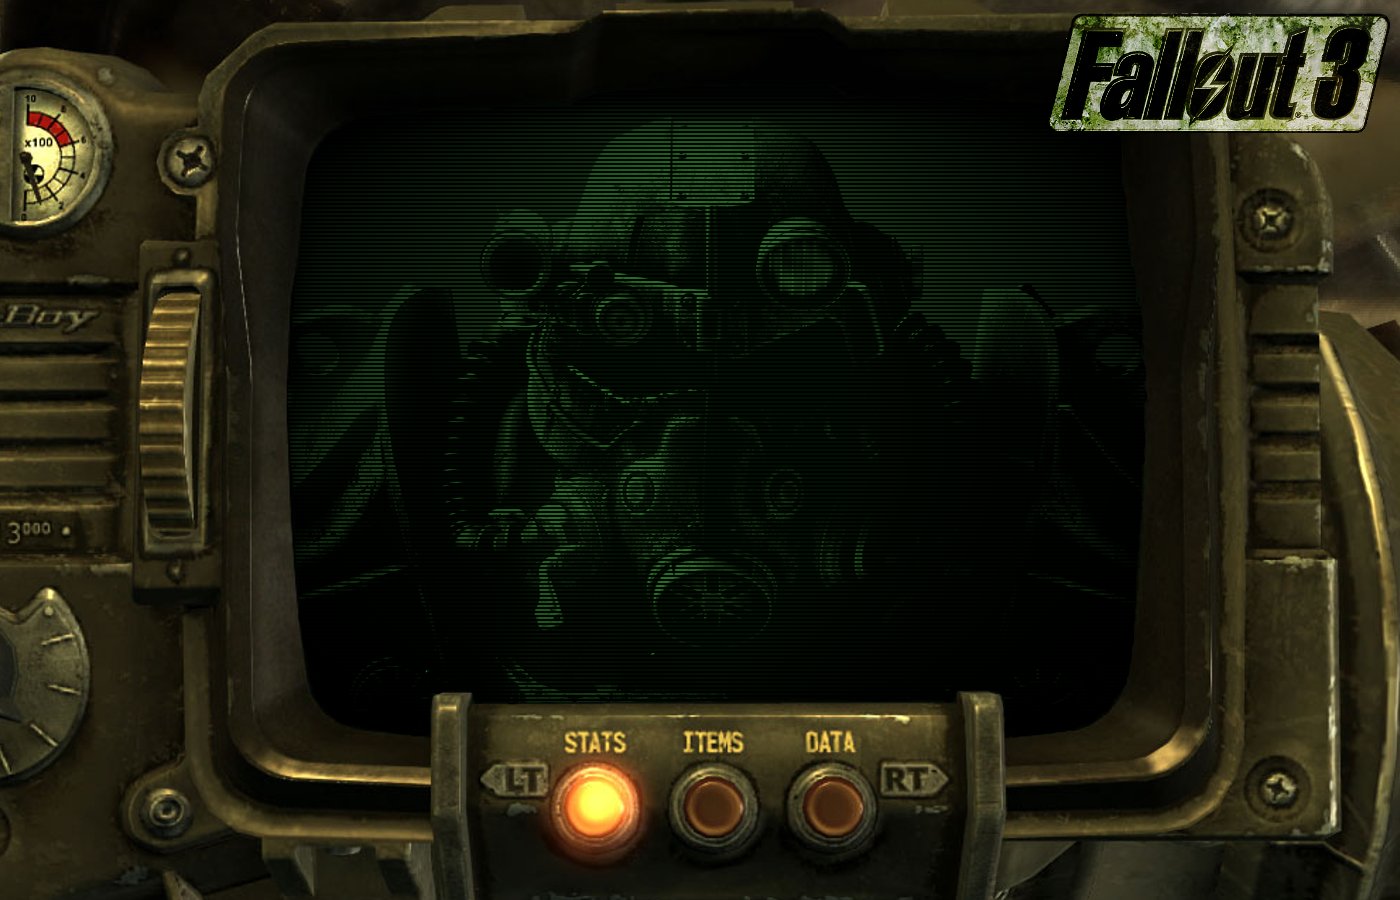 Free Download Fallout 3 Pipboy 3000 Download For Iphone In Themes Wallpapers 1400x900 For Your Desktop Mobile Tablet Explore 48 Pipboy Wallpaper Iphone Fallout Pipboy Iphone Wallpaper